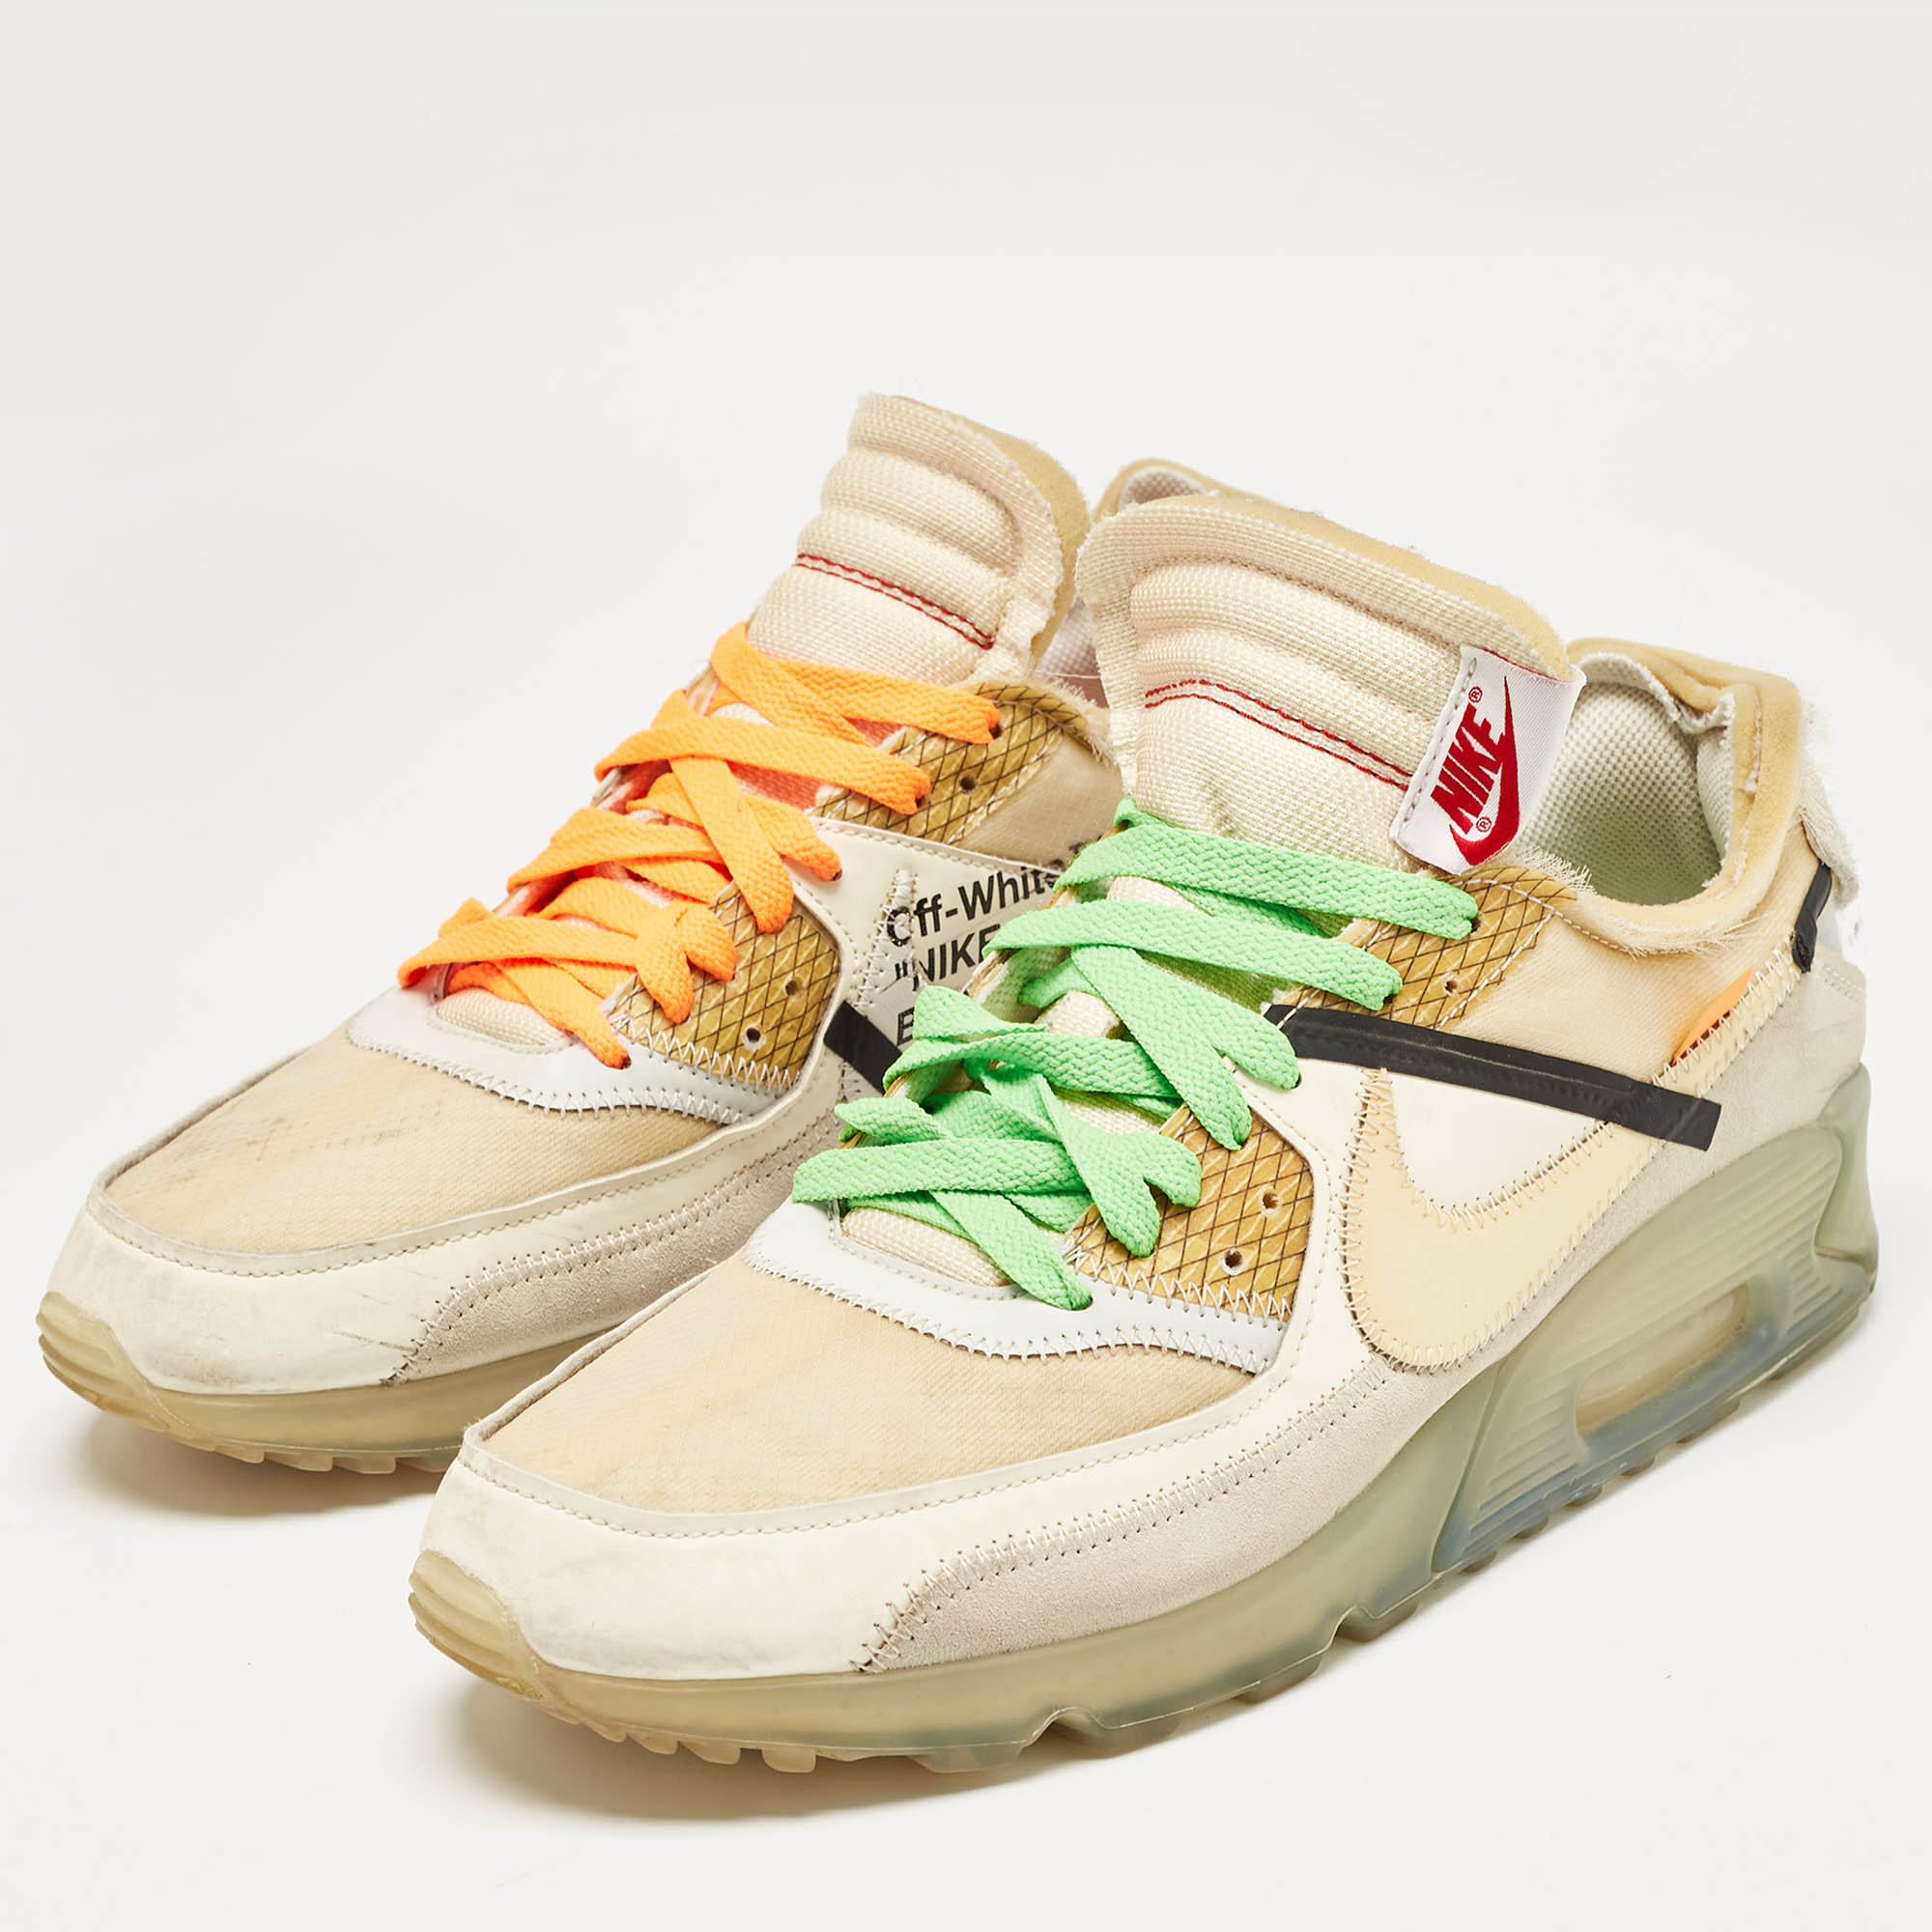 Off-White x Nike Suede and Leather The Ten AIR MAX 90 Sneakers Size 43  Off-White x Nike | TLC